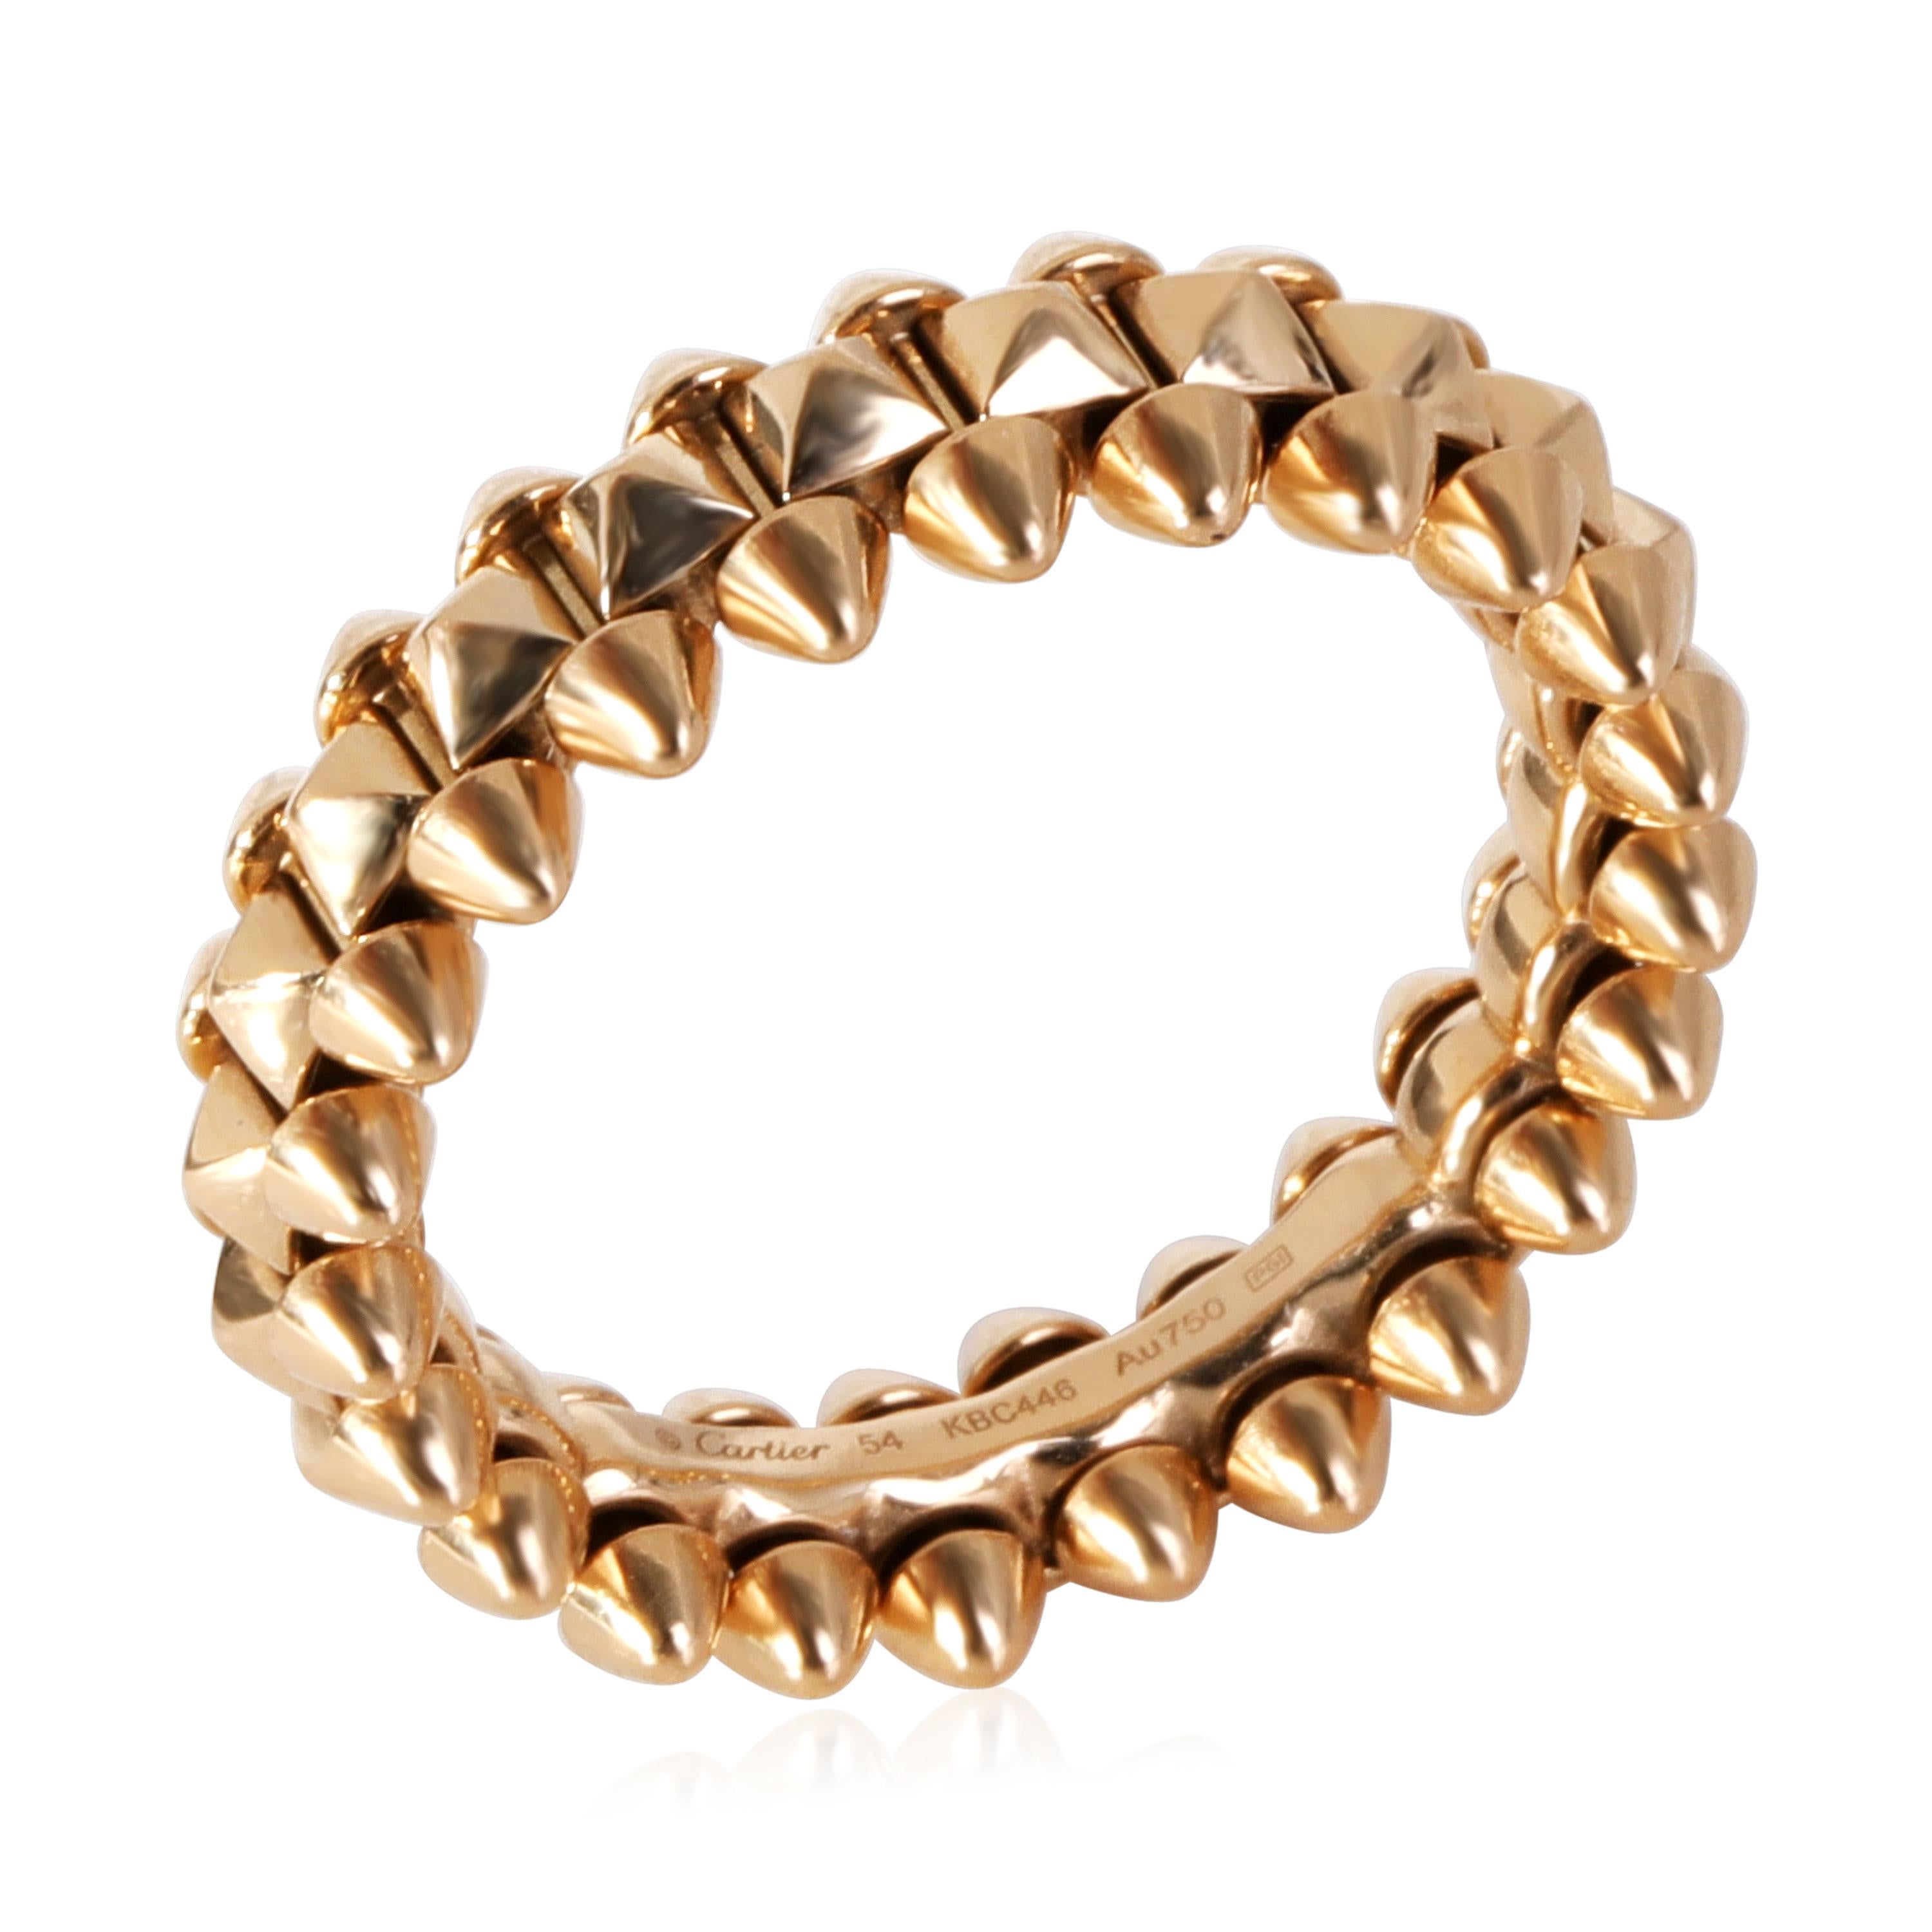 Cartier Clash De Cartier Ring in 18k Rose Gold (Small Model)

PRIMARY DETAILS
SKU: 119076
Listing Title: Cartier Clash De Cartier Ring in 18k Rose Gold (Small Model)
Condition Description: Retails for 2240 USD. Ring size is 6.75.Comes with